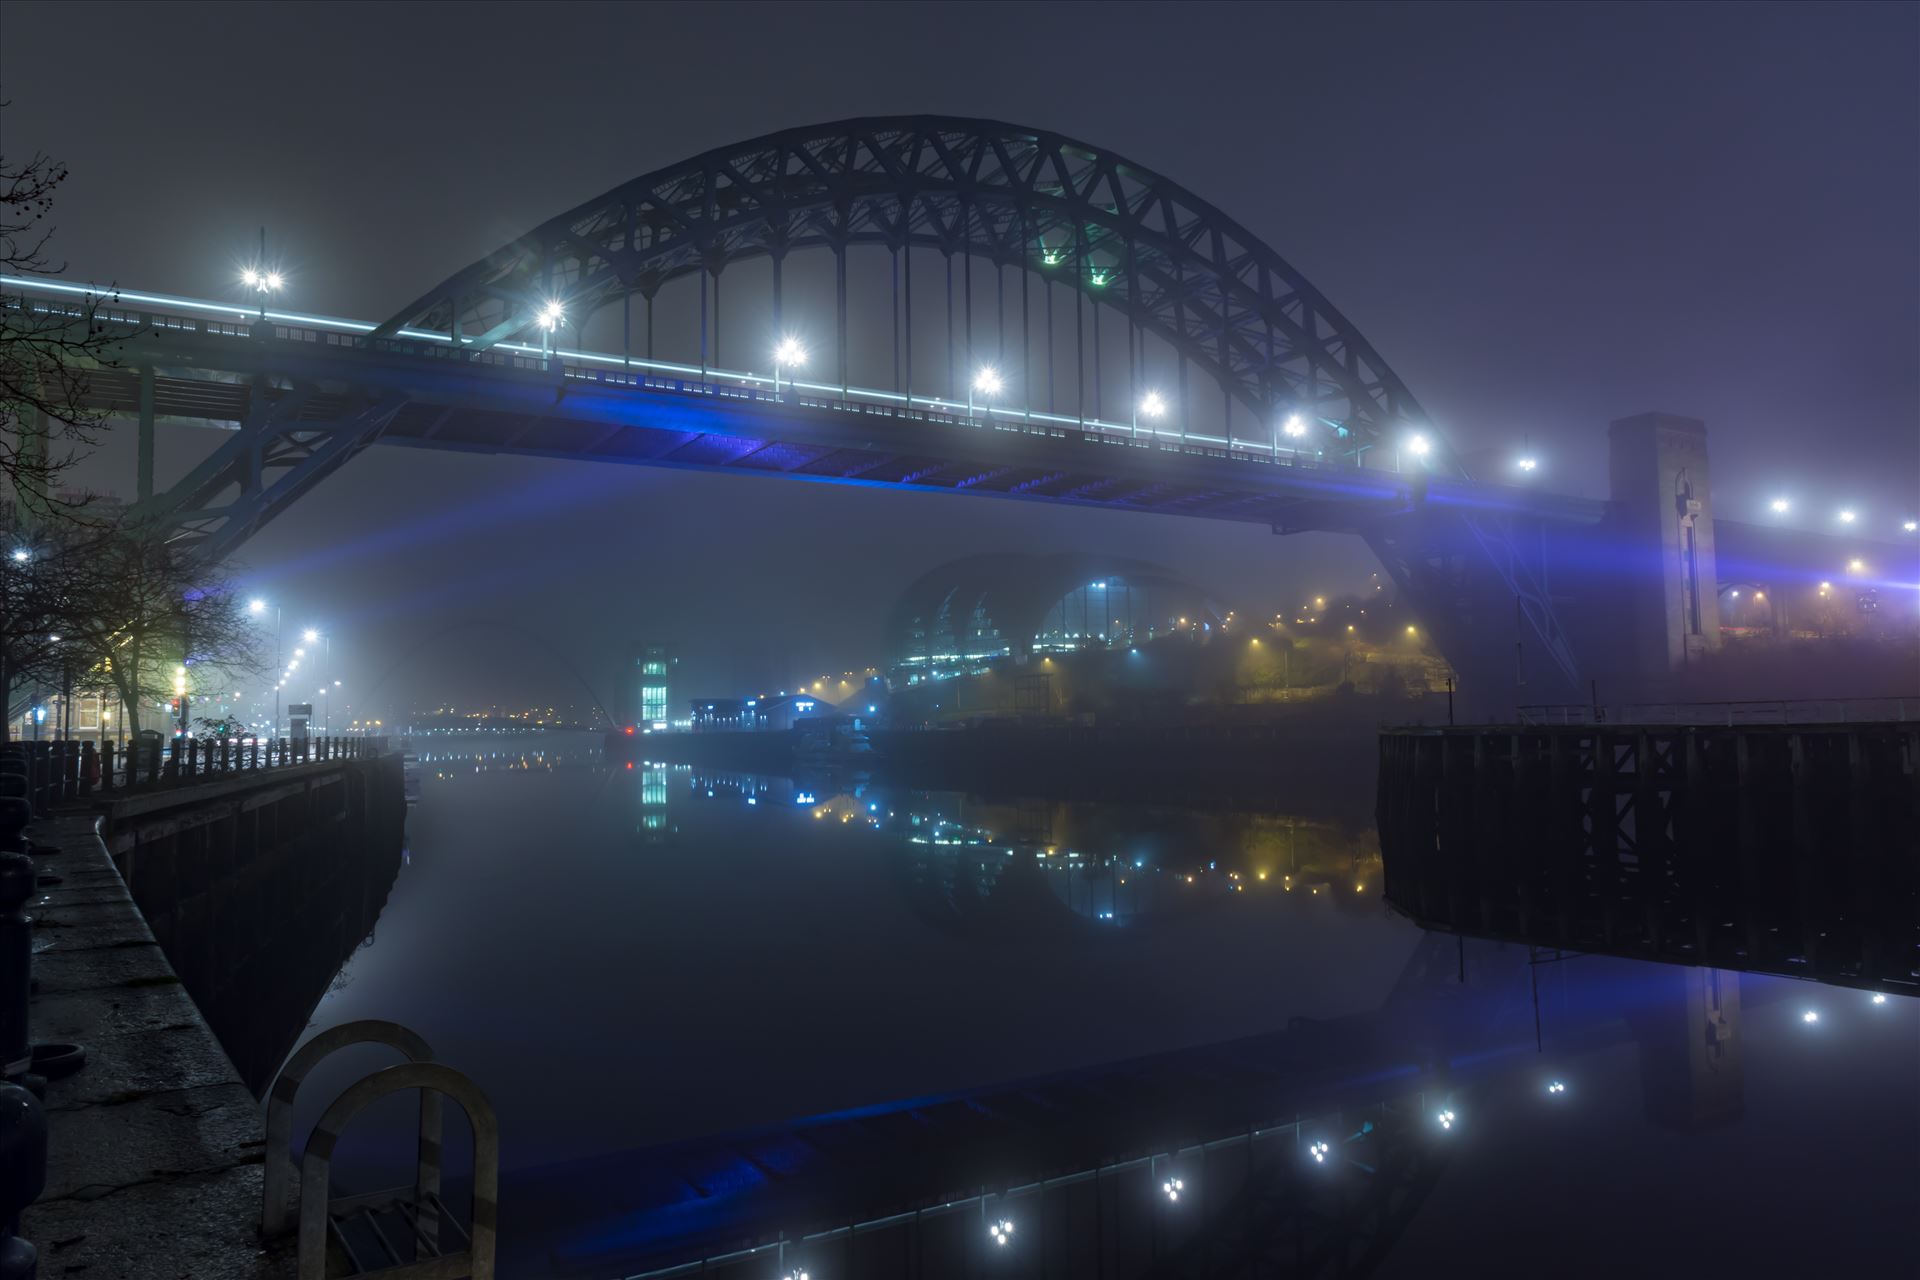 Fog on the Tyne 2Shot on the quayside at Newcastle early one foggy morning